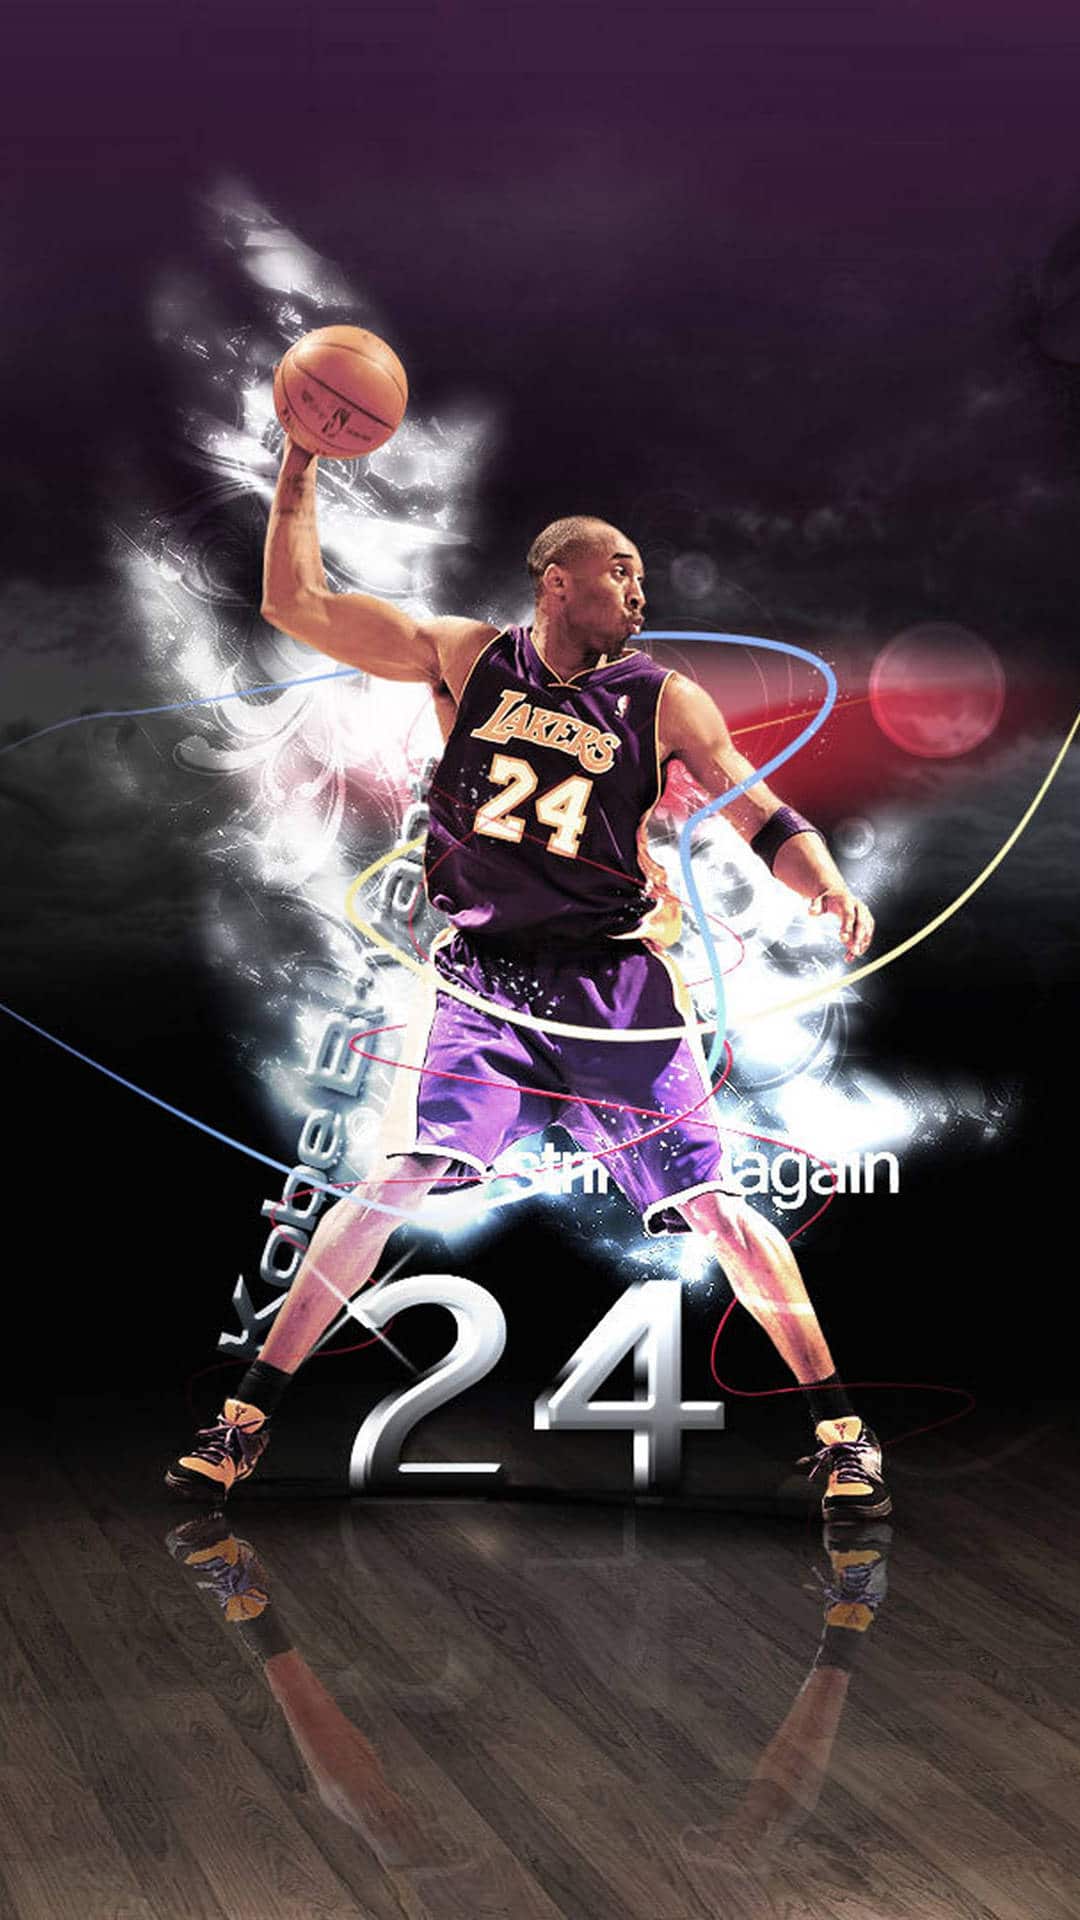 30+ Kobe Bryant Wallpapers HD for iPhone 2016 - Apple Lives1080 x 1920